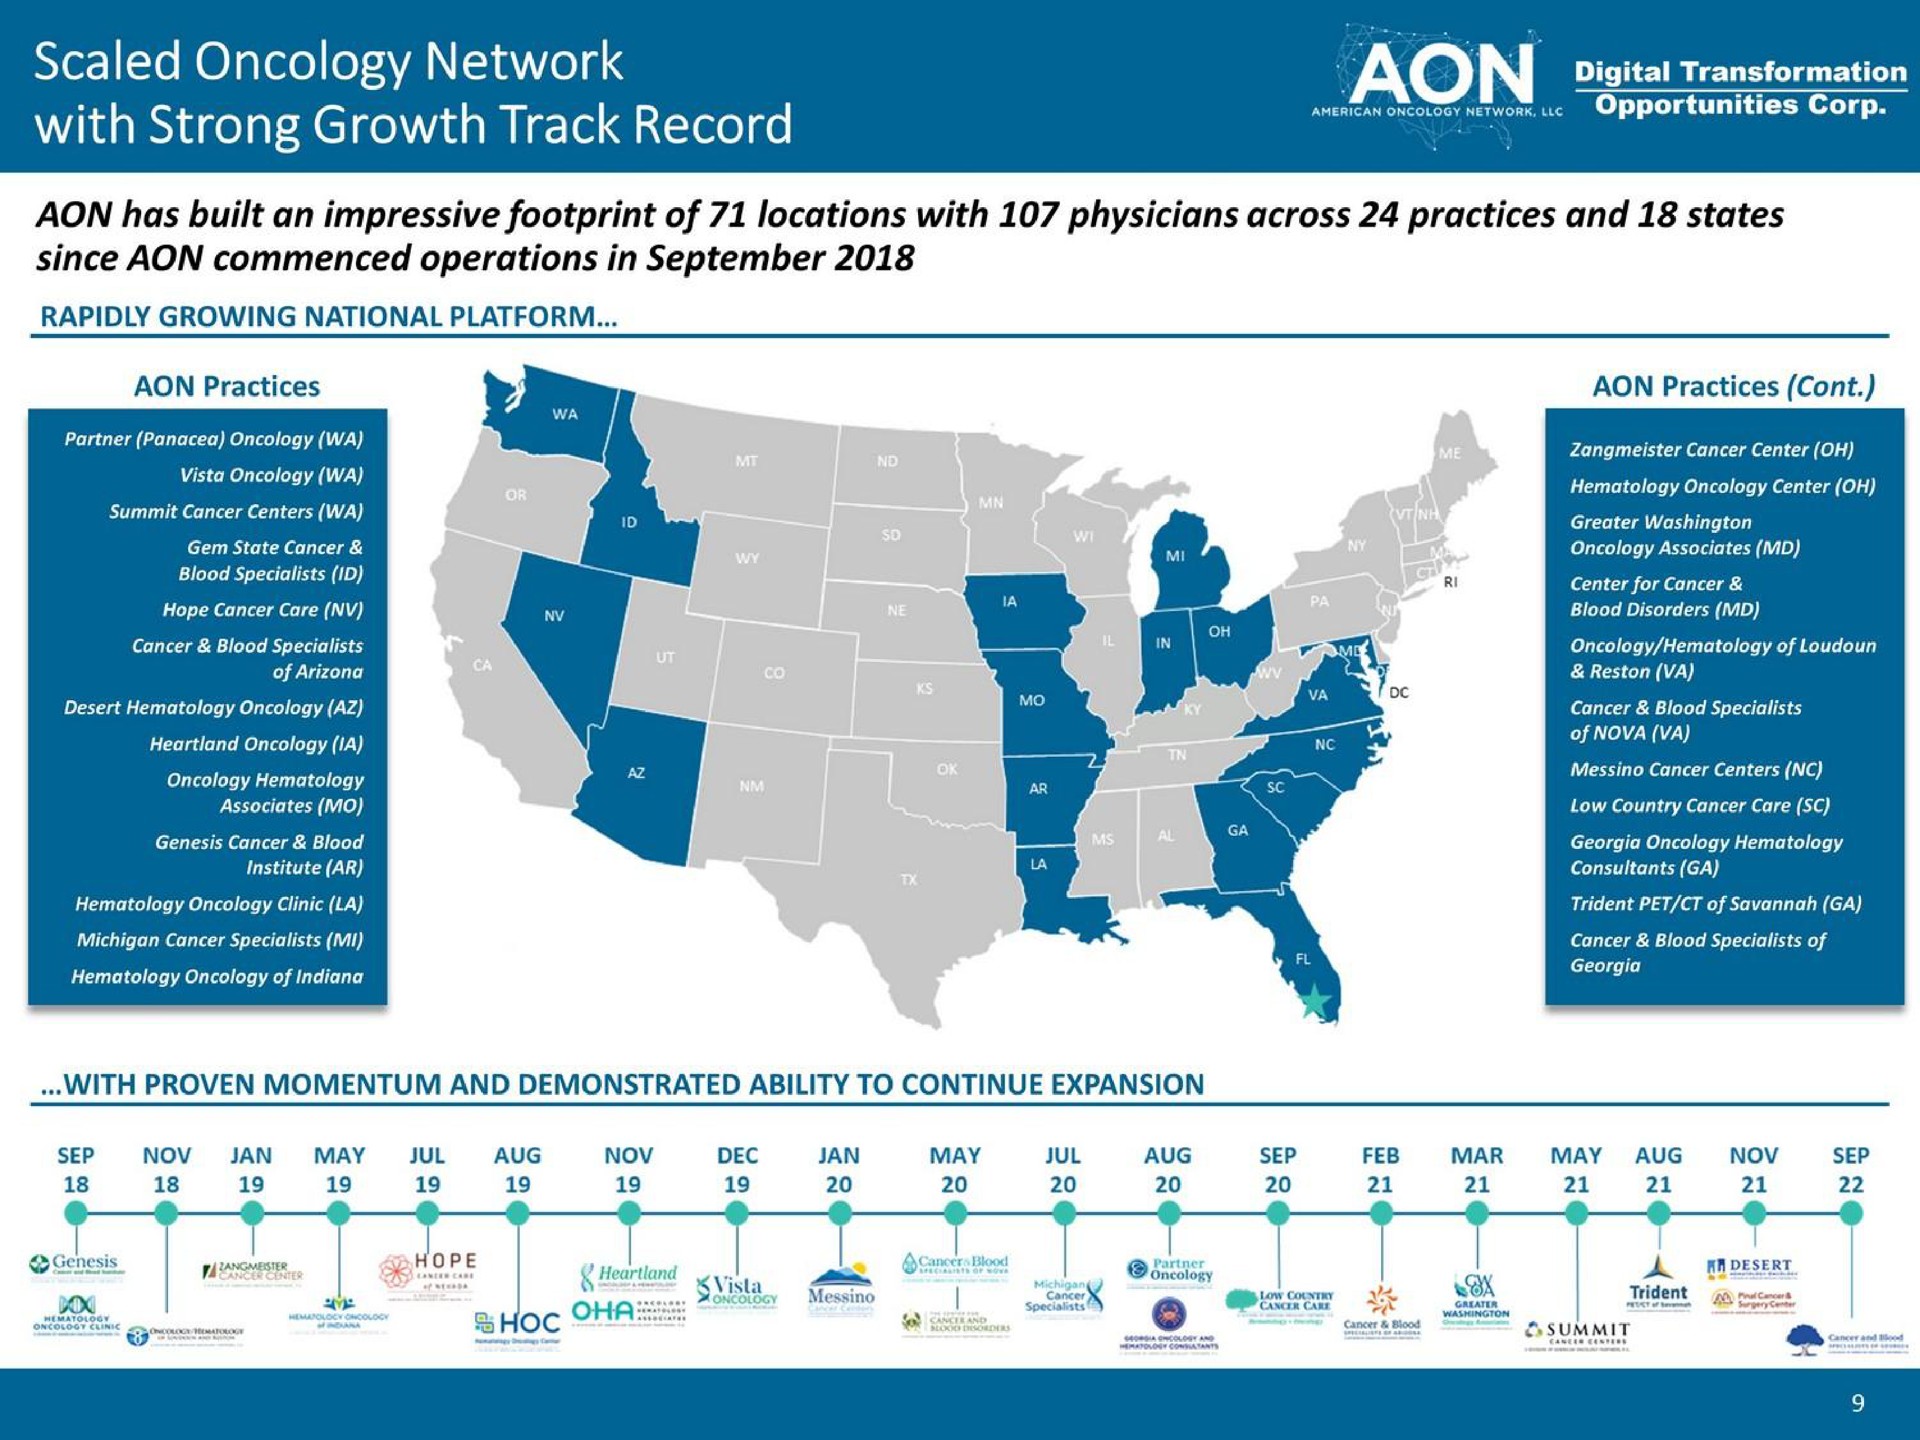 scaled oncology network visita transformation has built an impressive footprint of locations with physicians across practices and states since commenced operations in | American Oncology Network